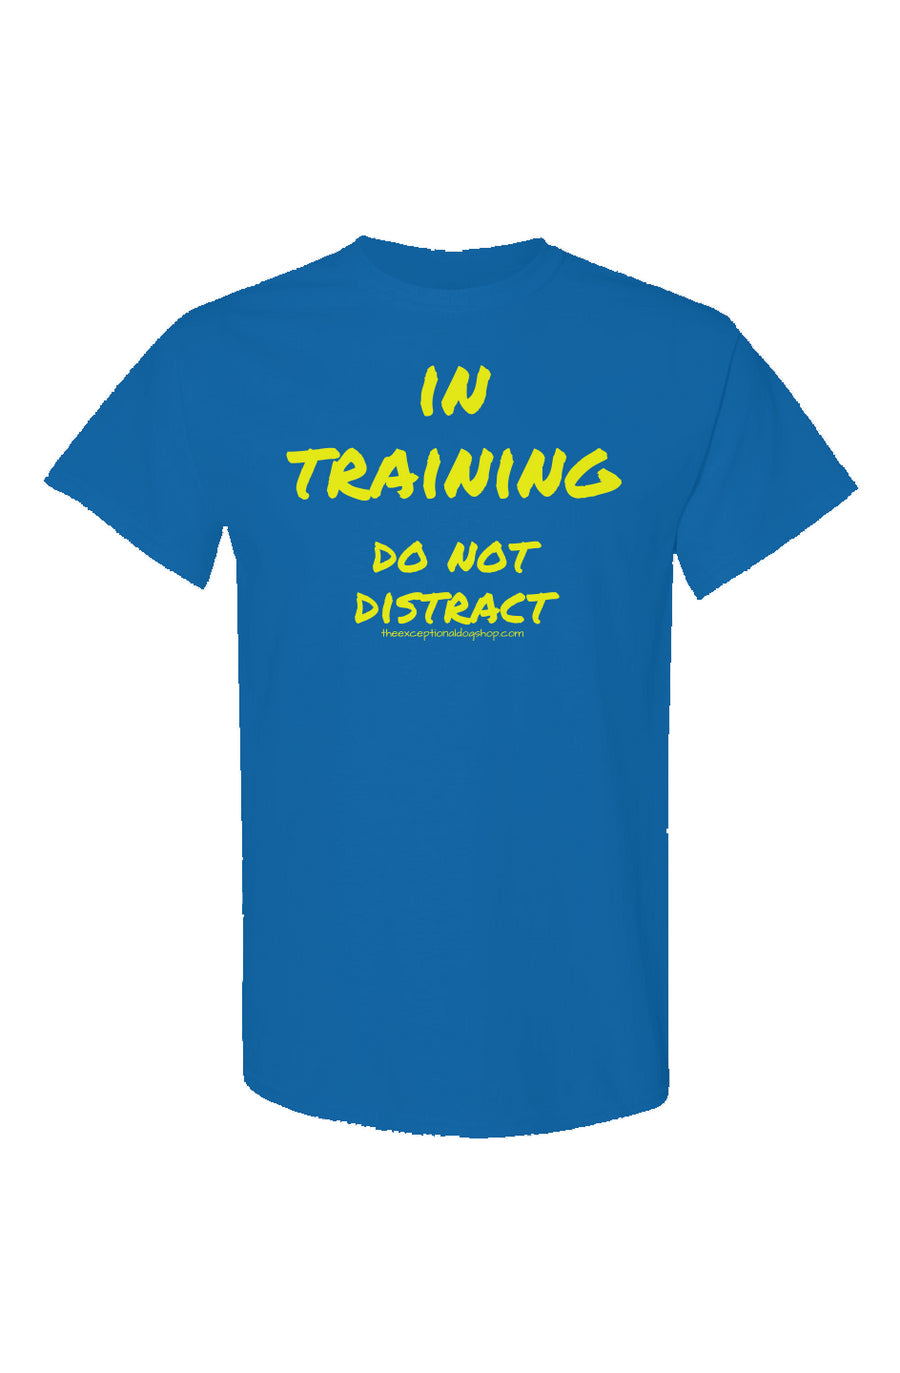 Neon blue training t shirt with the text in training, do not distract in large yellow lettering on the front of the shirt.